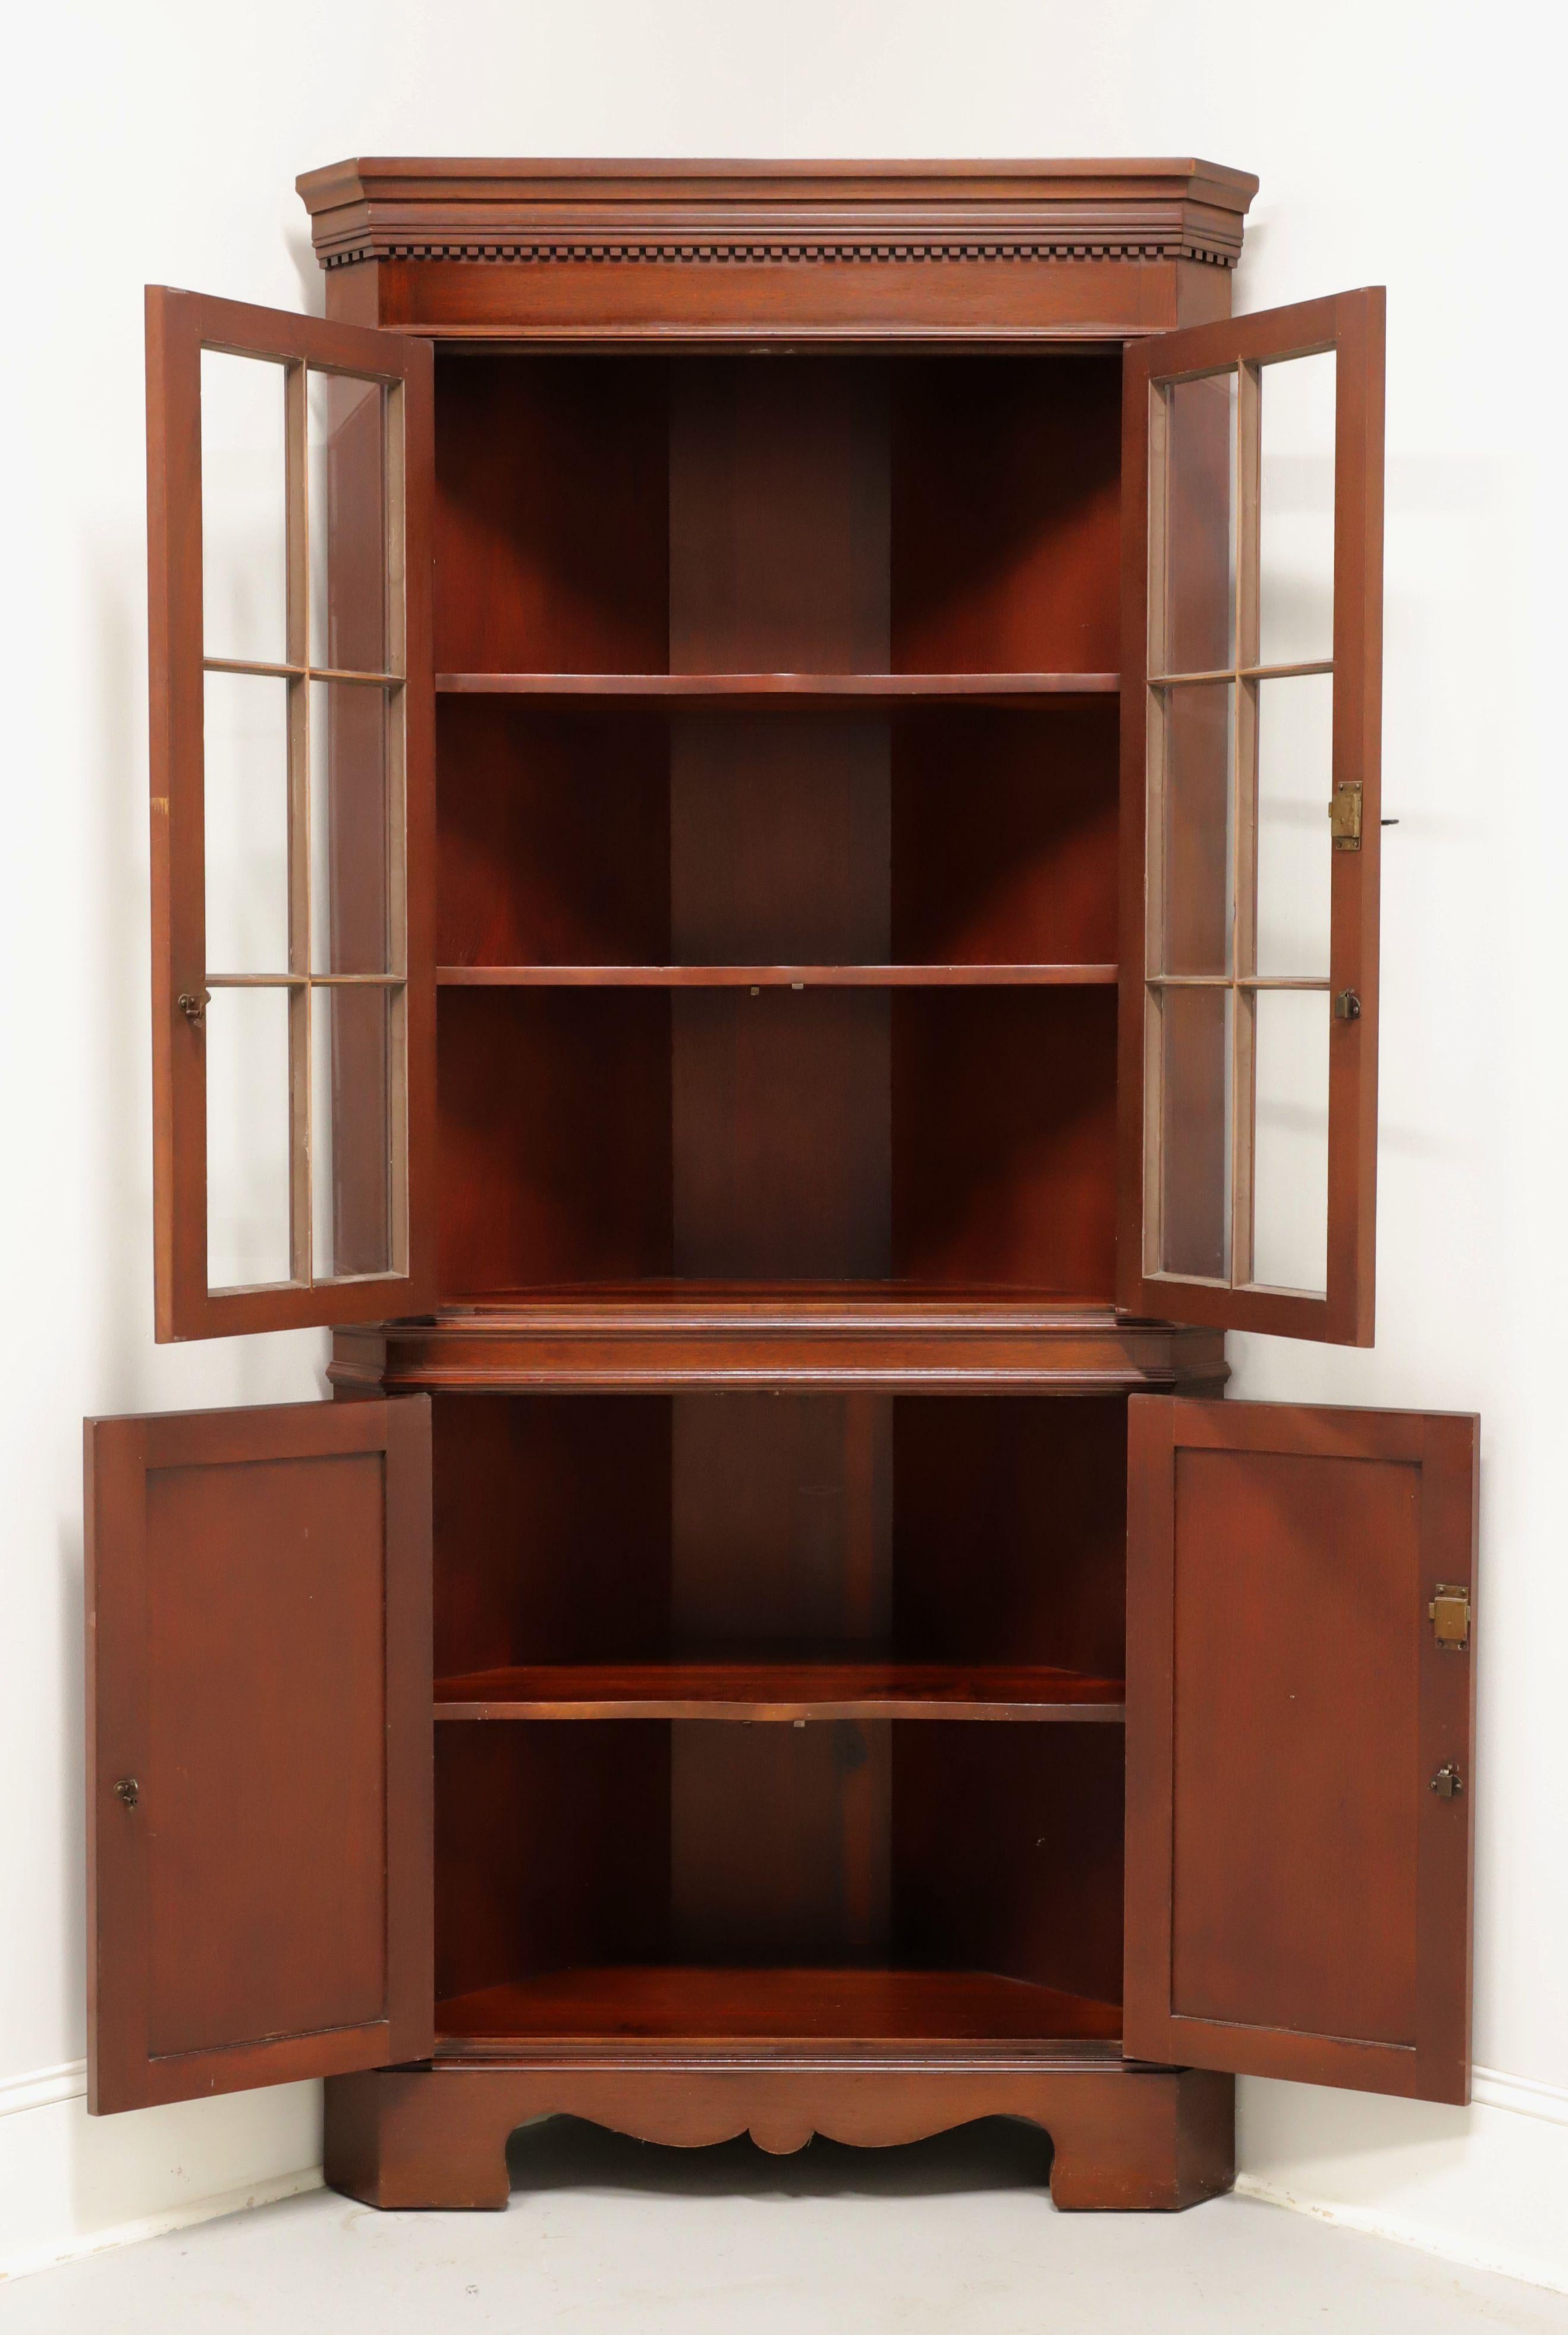 CRAFTIQUE Solid Mahogany Chippendale Style Corner Cupboard / Cabinet - B In Good Condition For Sale In Charlotte, NC